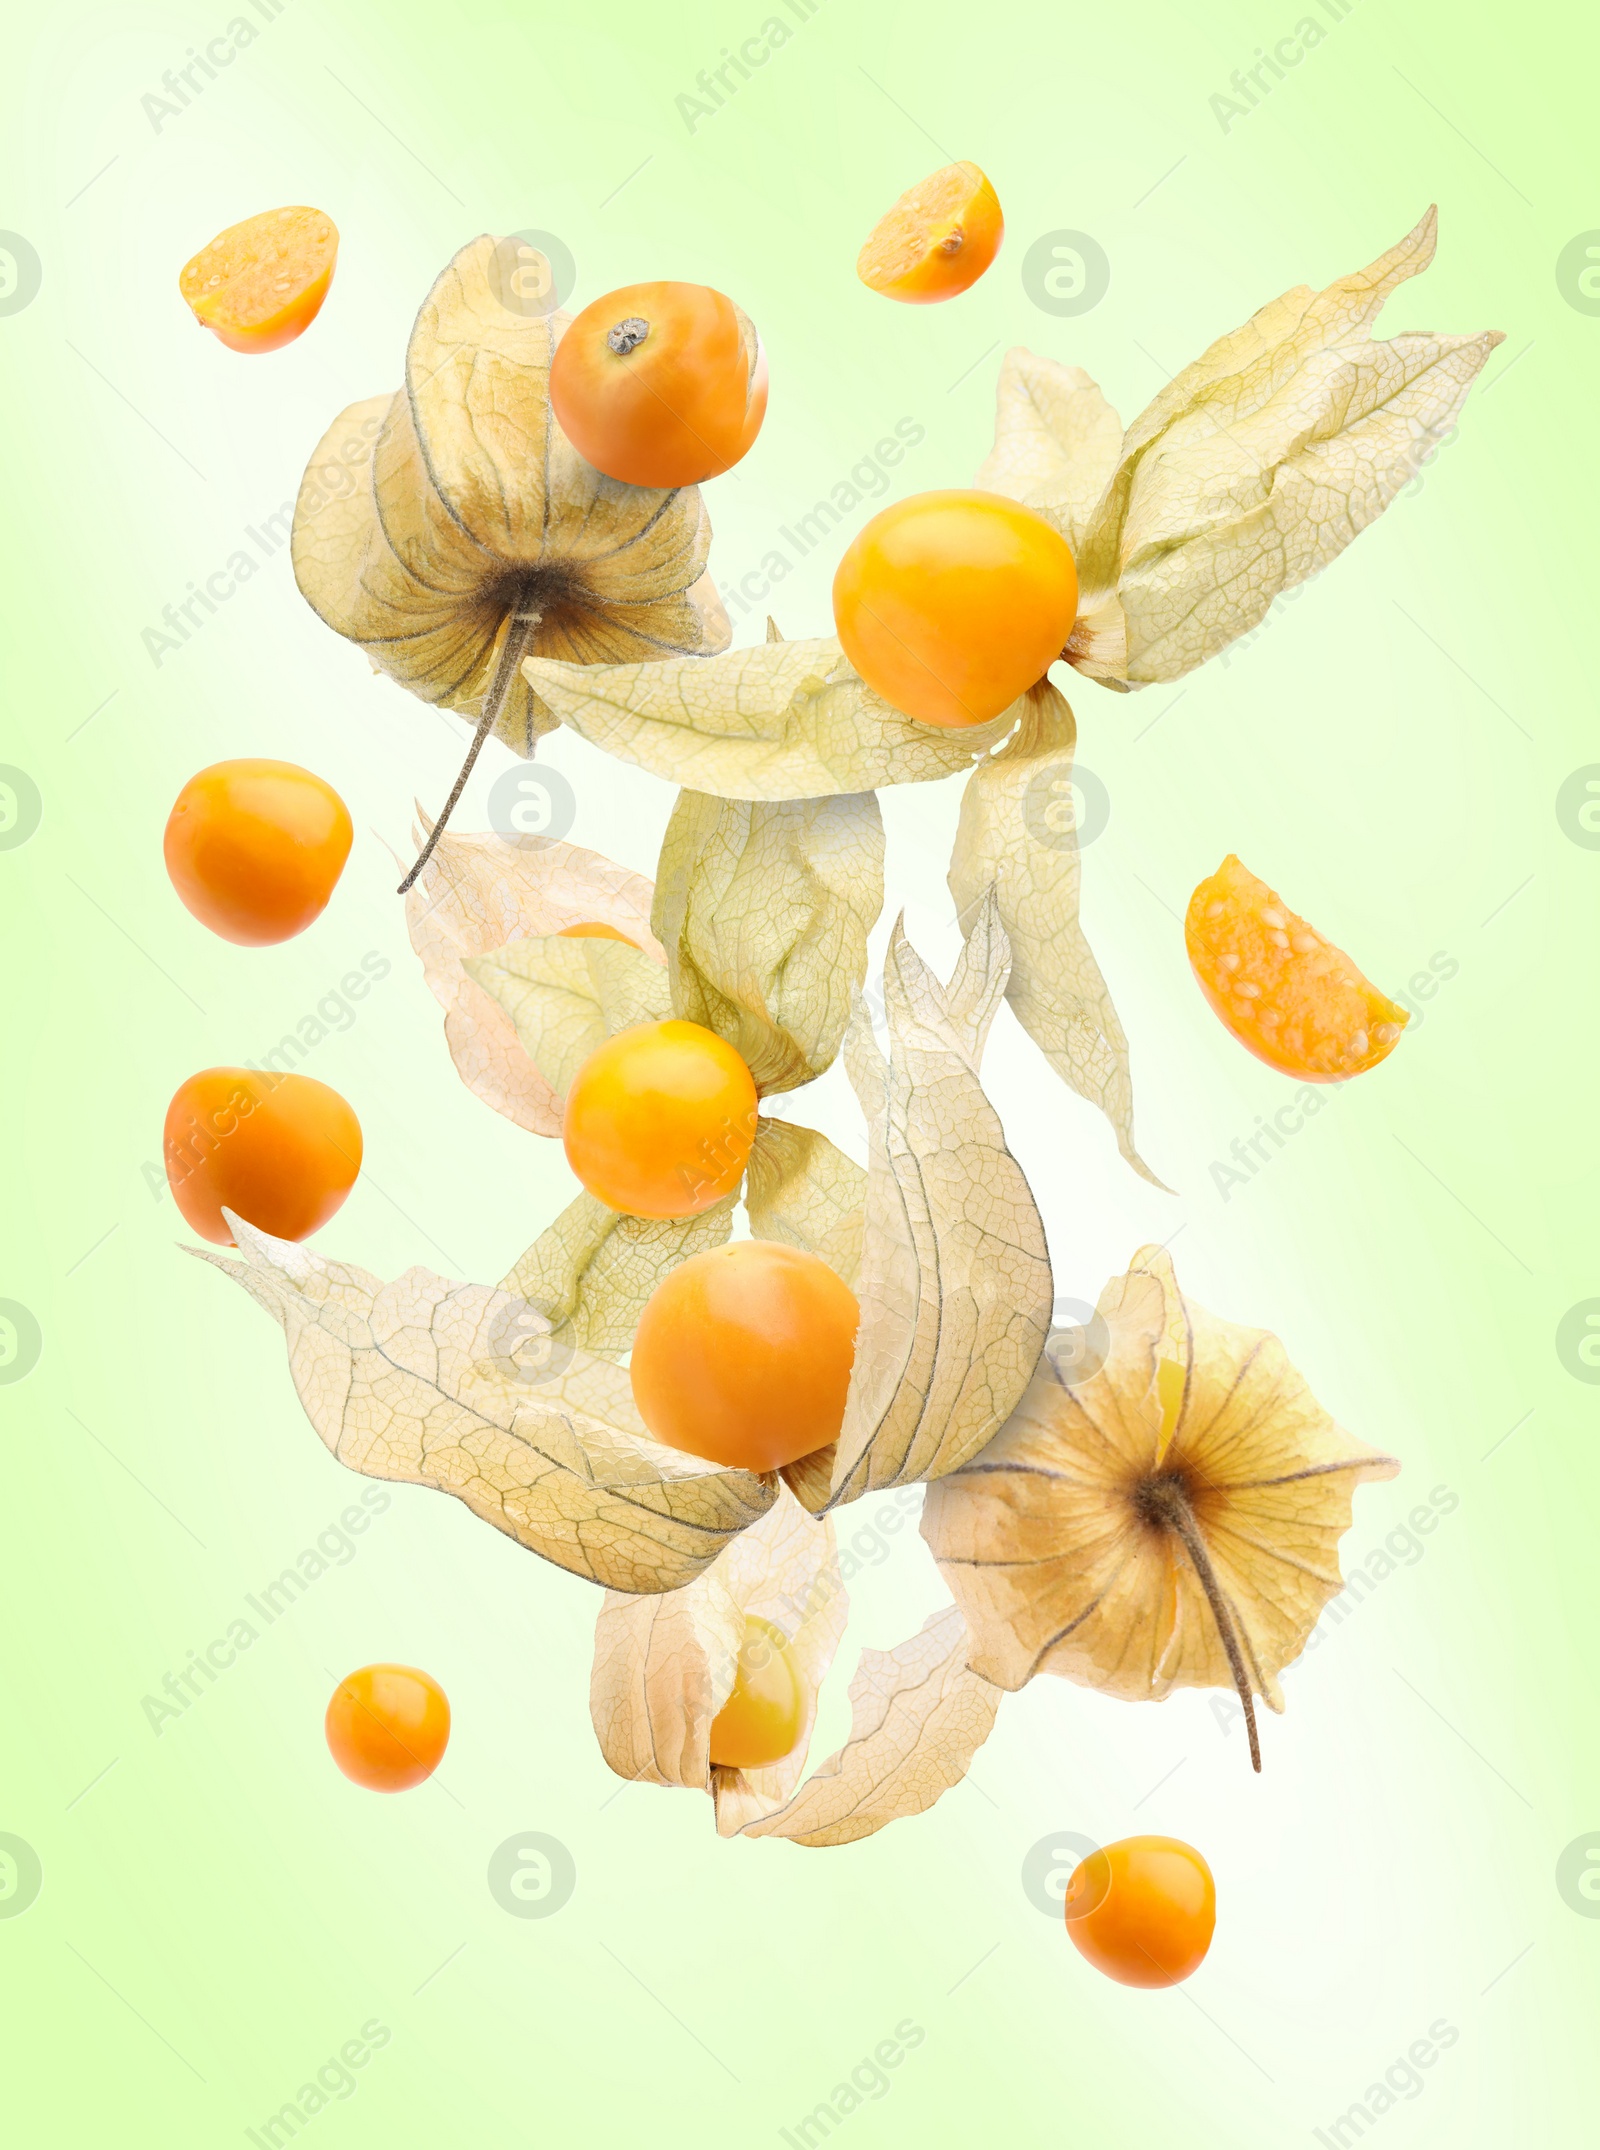 Image of Ripe orange physalis fruits with calyx falling on light green gradient background